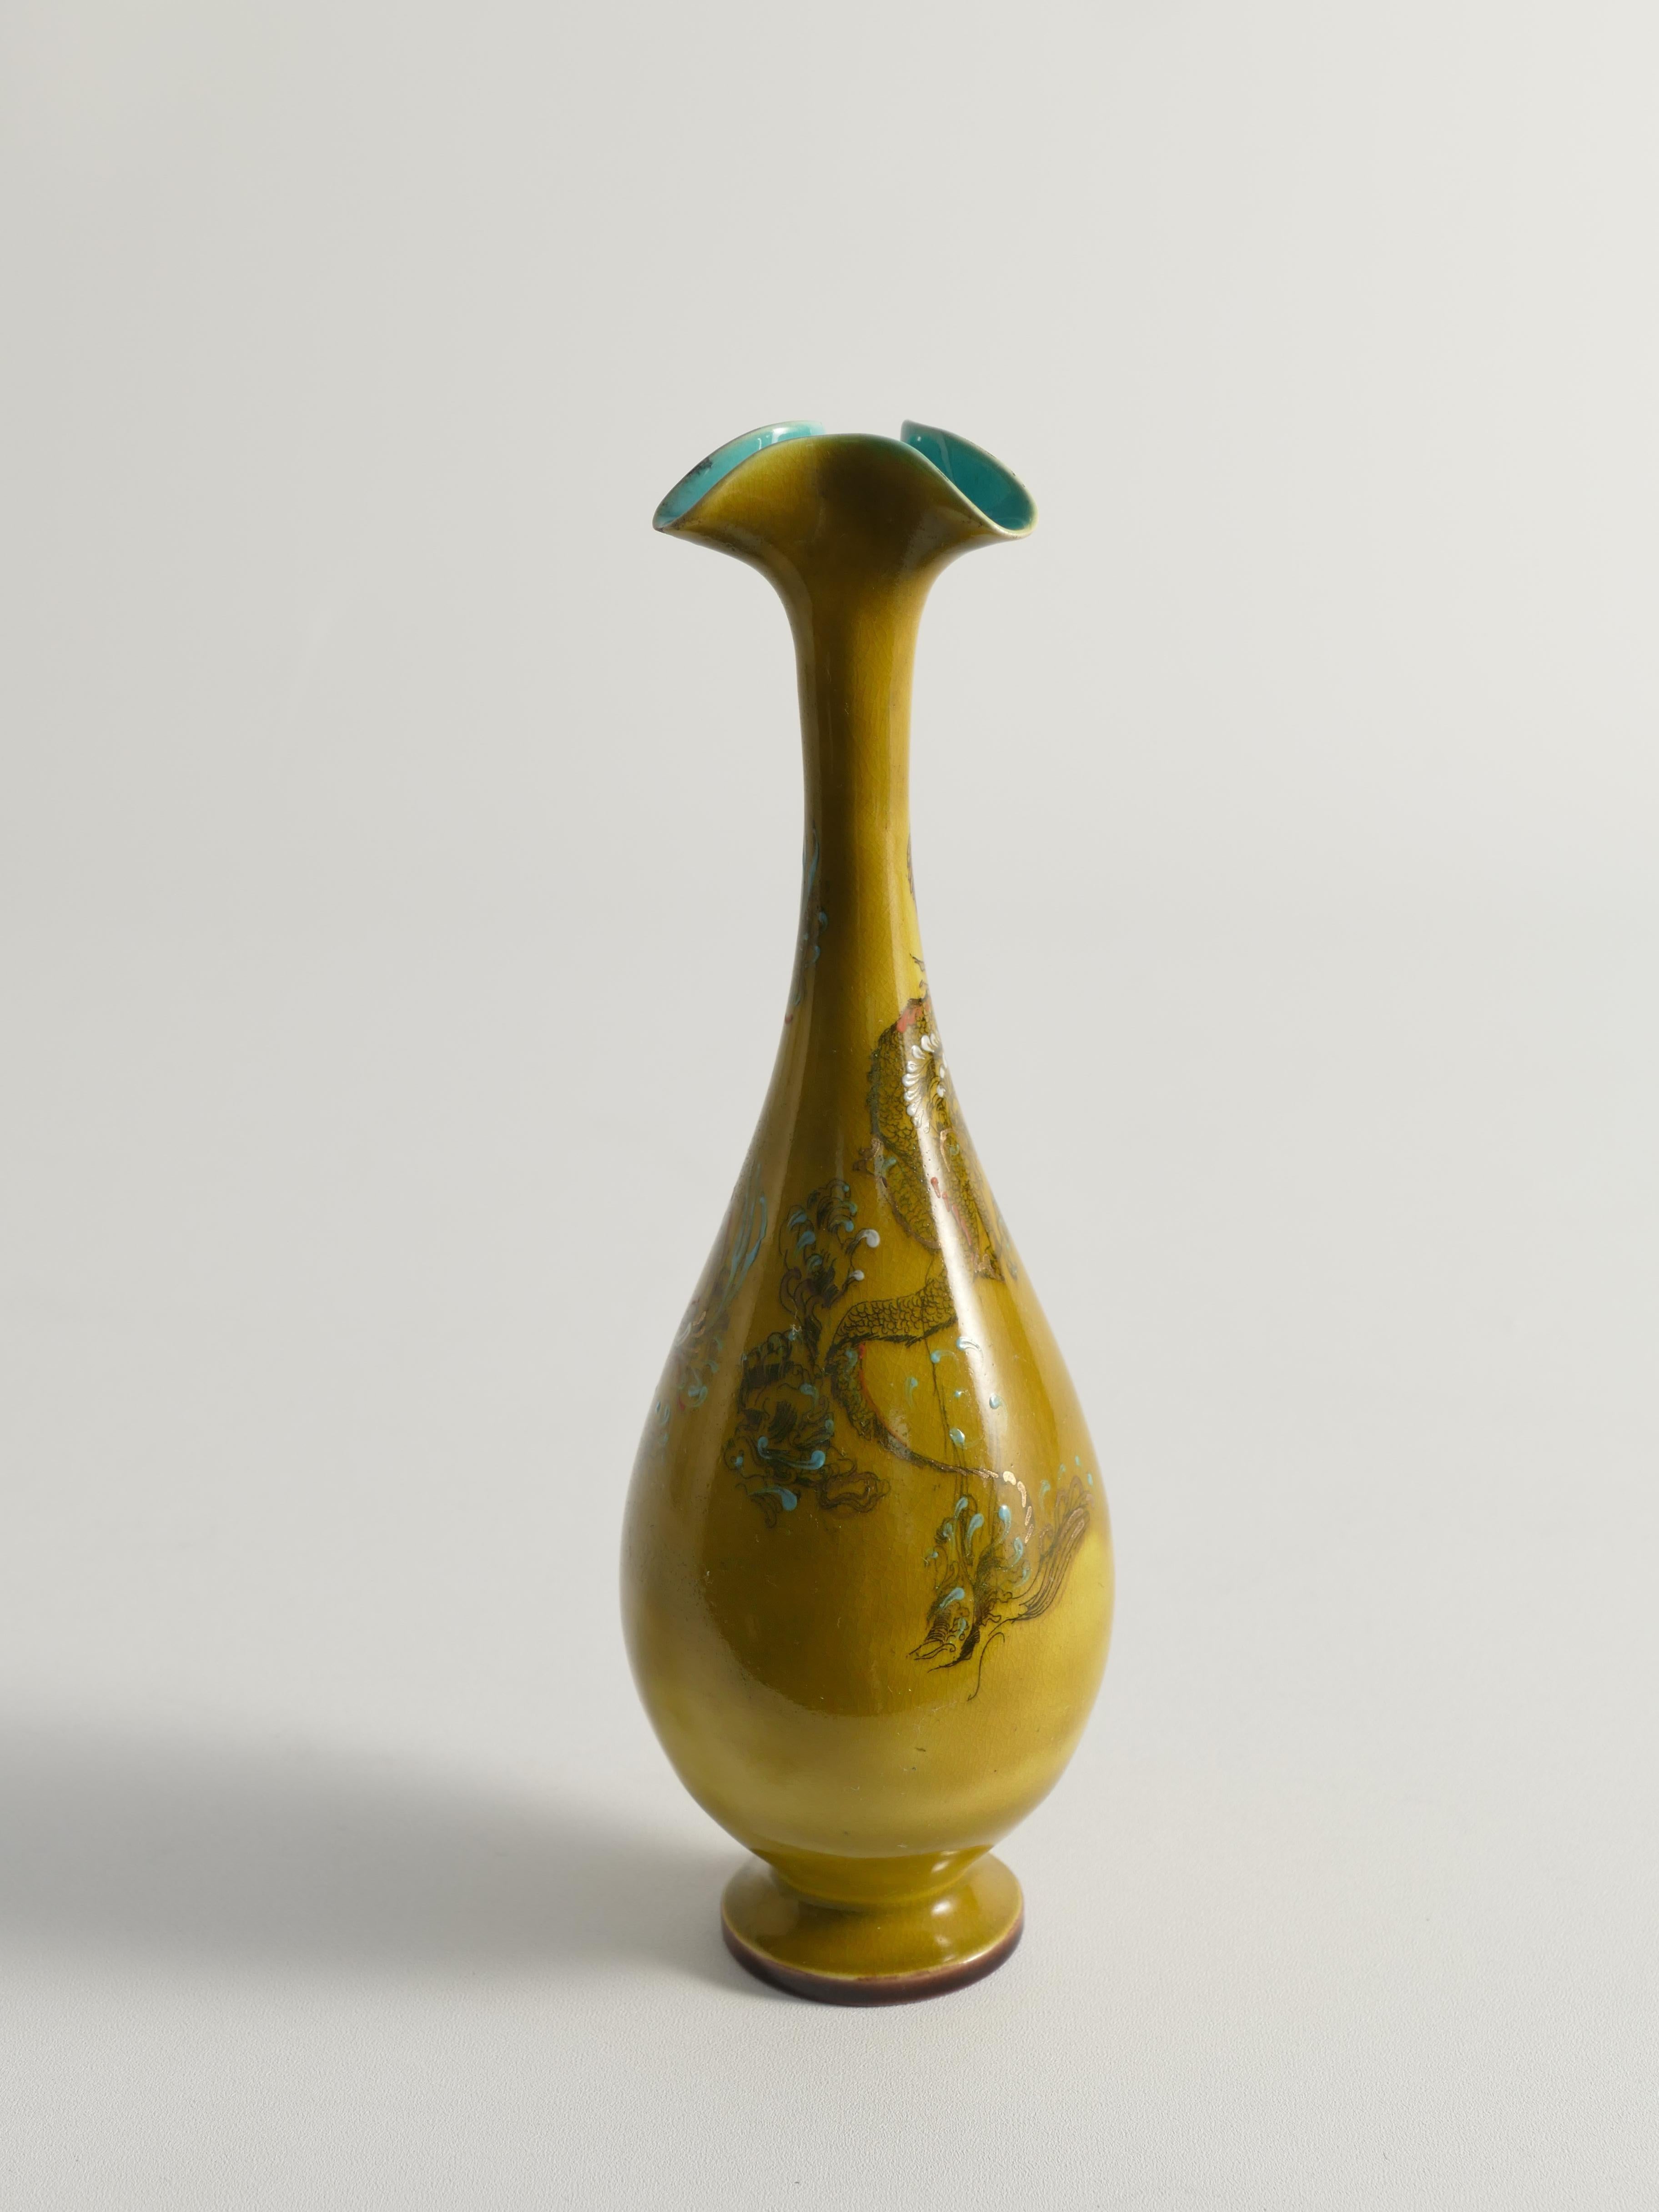 Glazed Chinoiserie Ochre Yellow Dragon Vase by Lambeth Doulton Faience, England 1880s For Sale